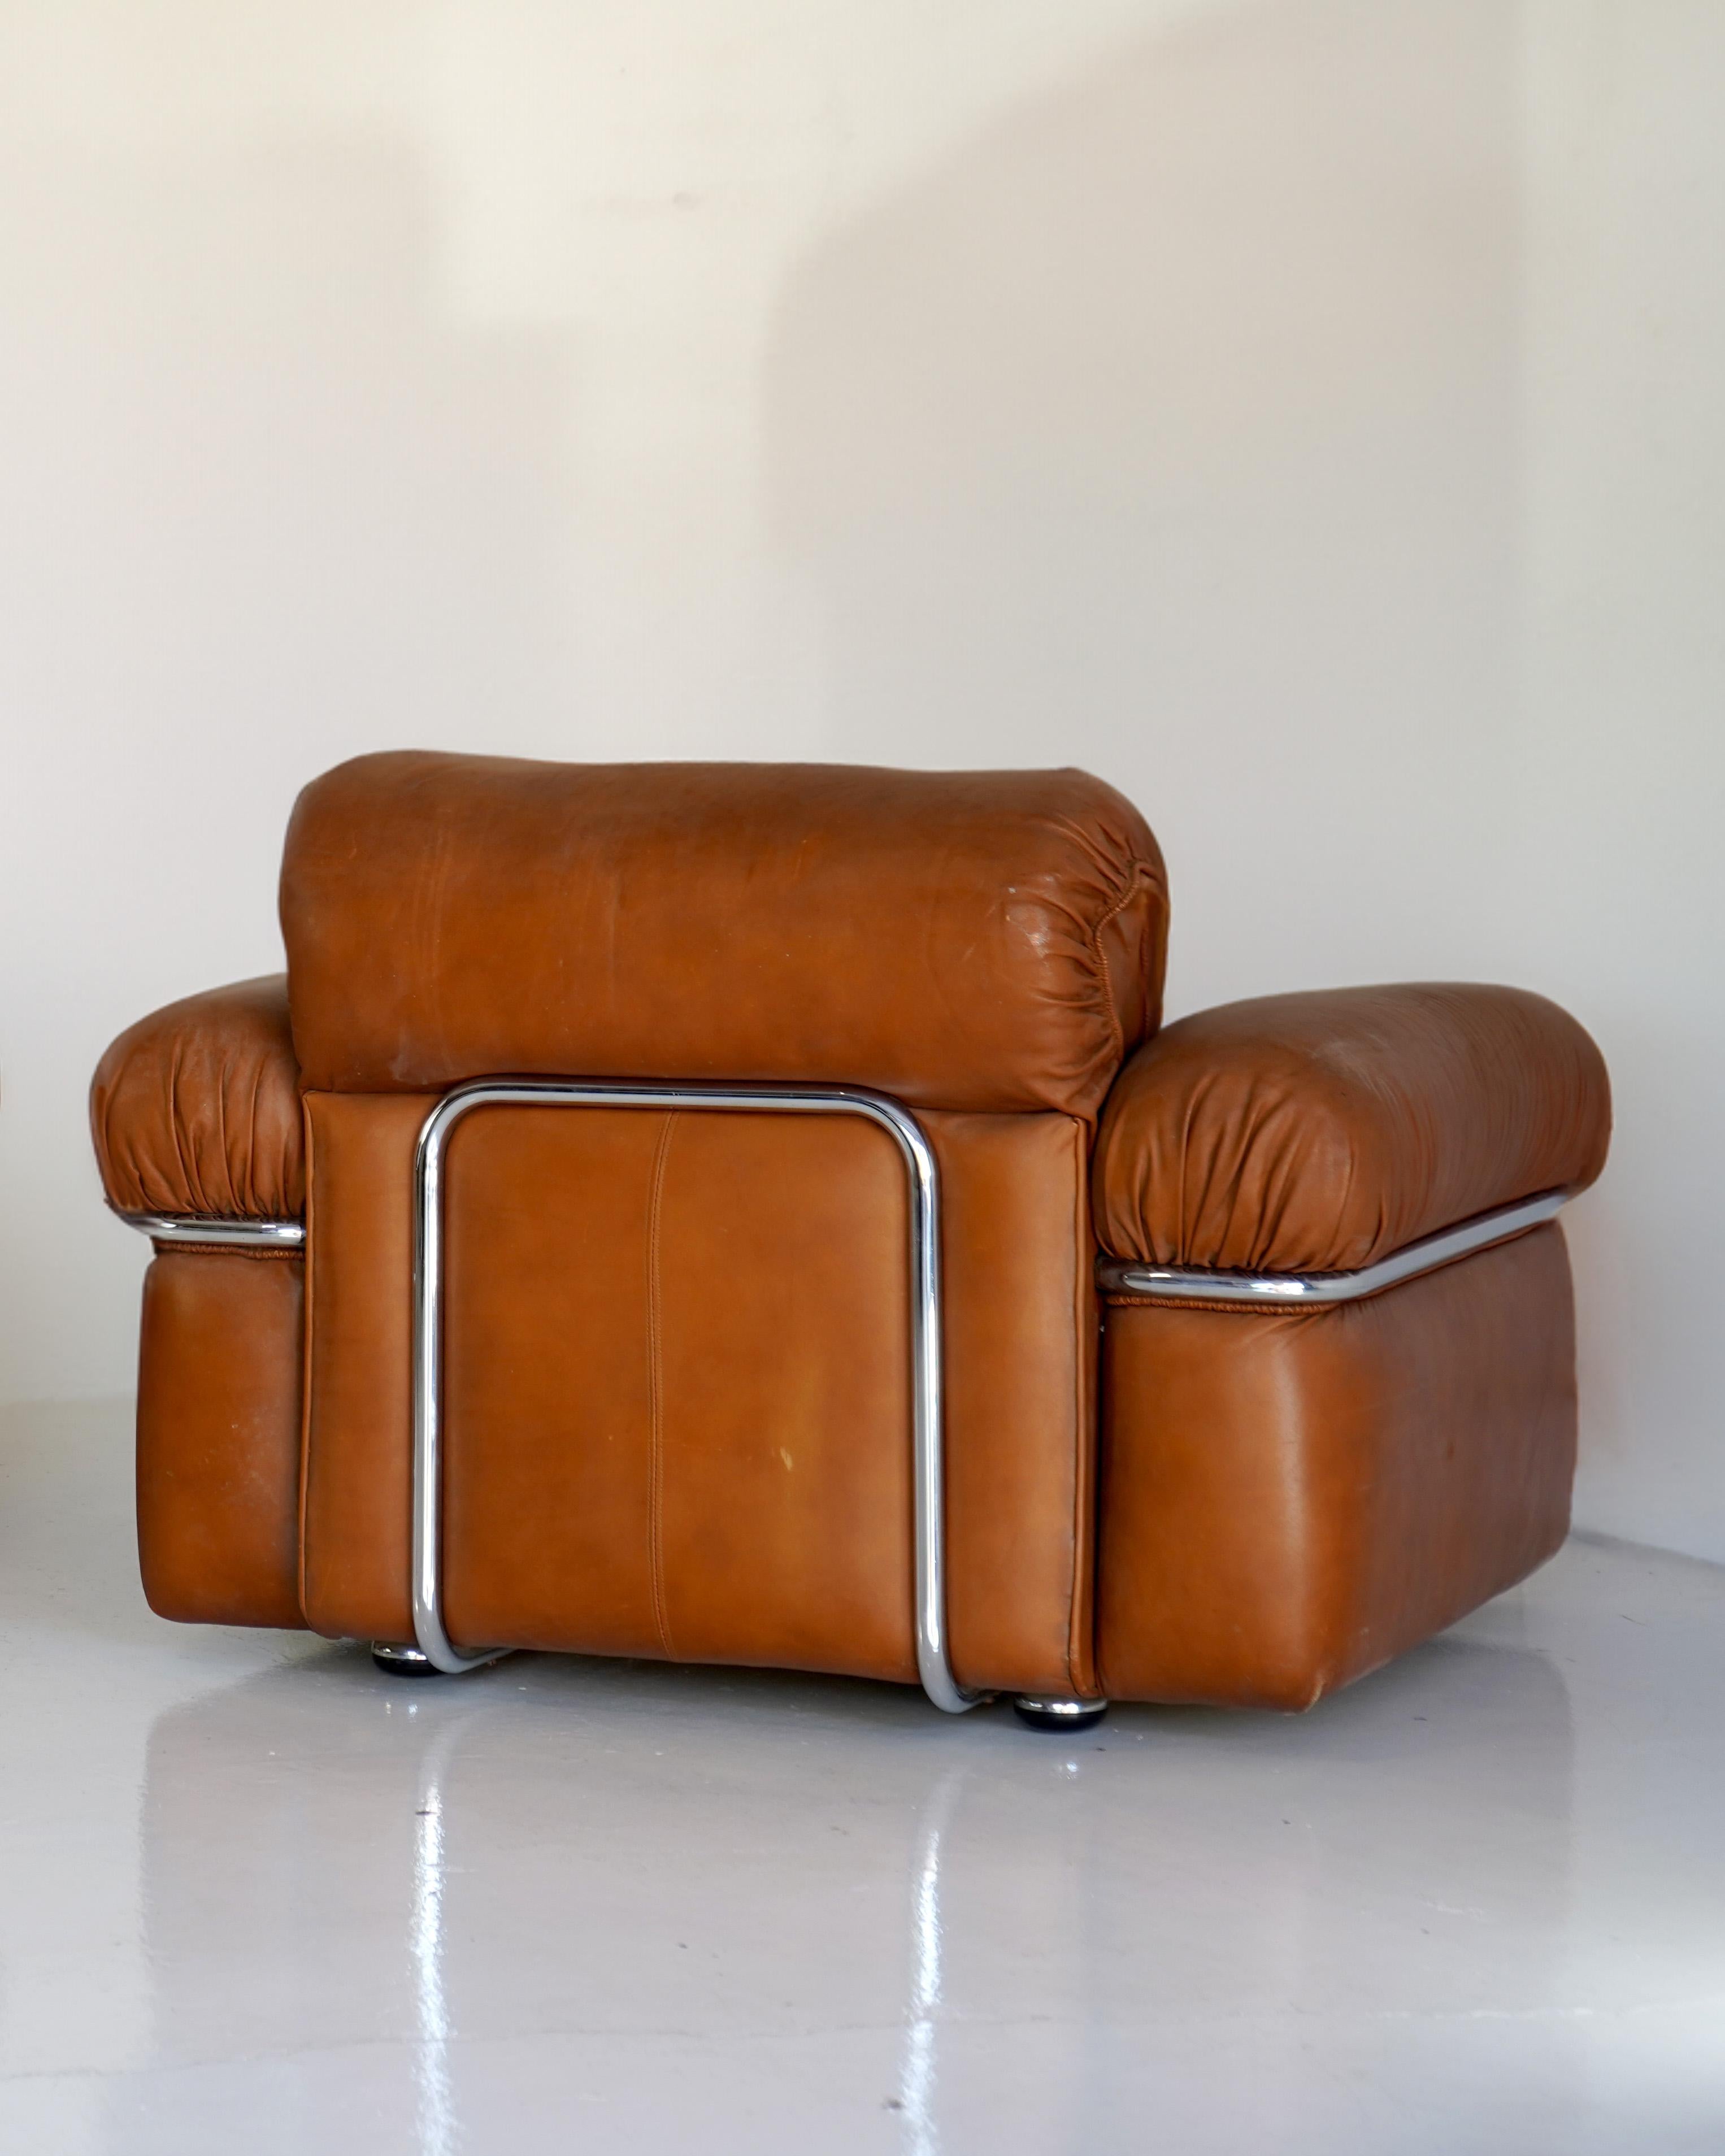 20th Century Italian Leather and Chrome Armchairs, Attributed to Adriano Piazzesi, Pair For Sale